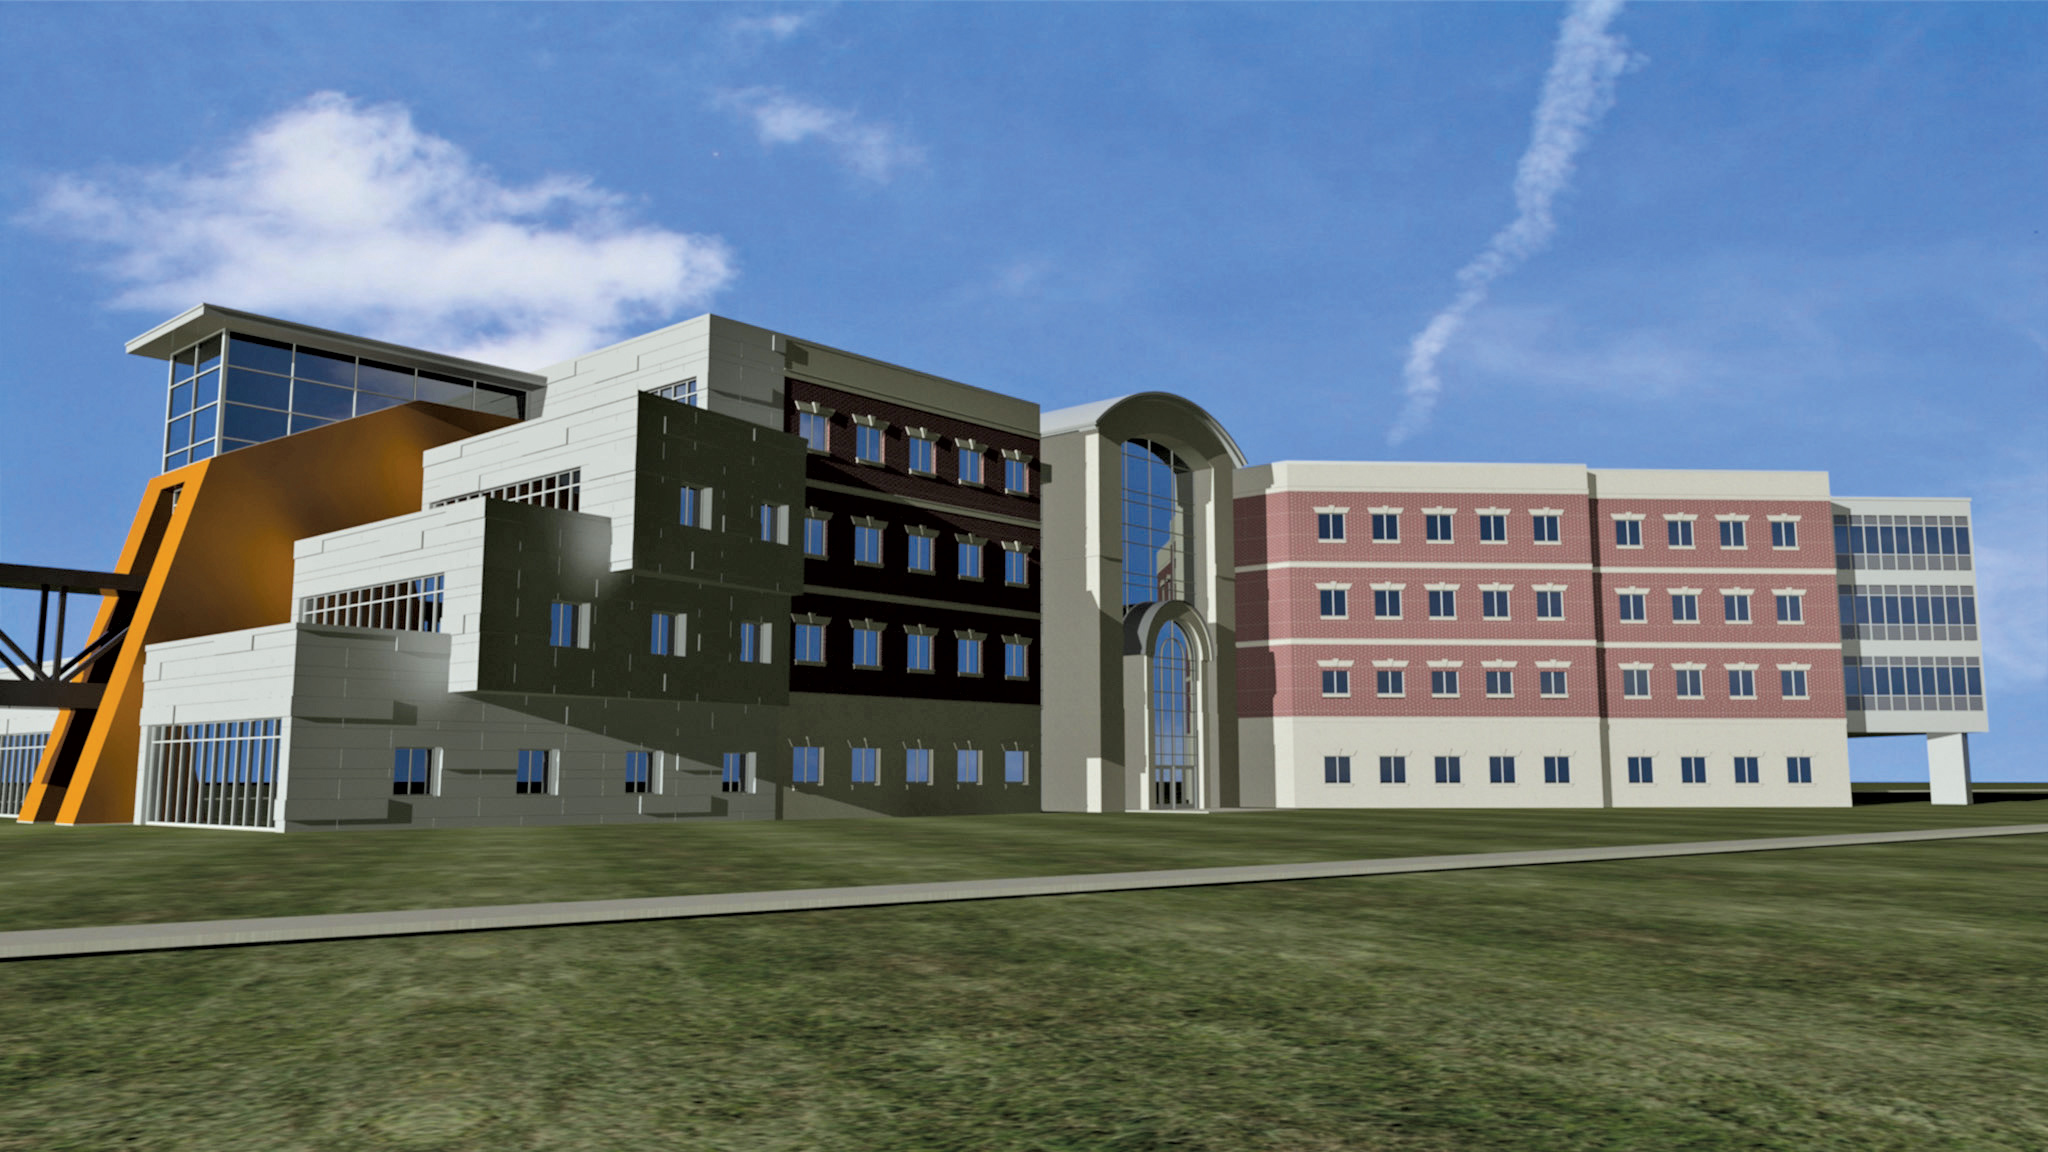 rendering of the Latimer building